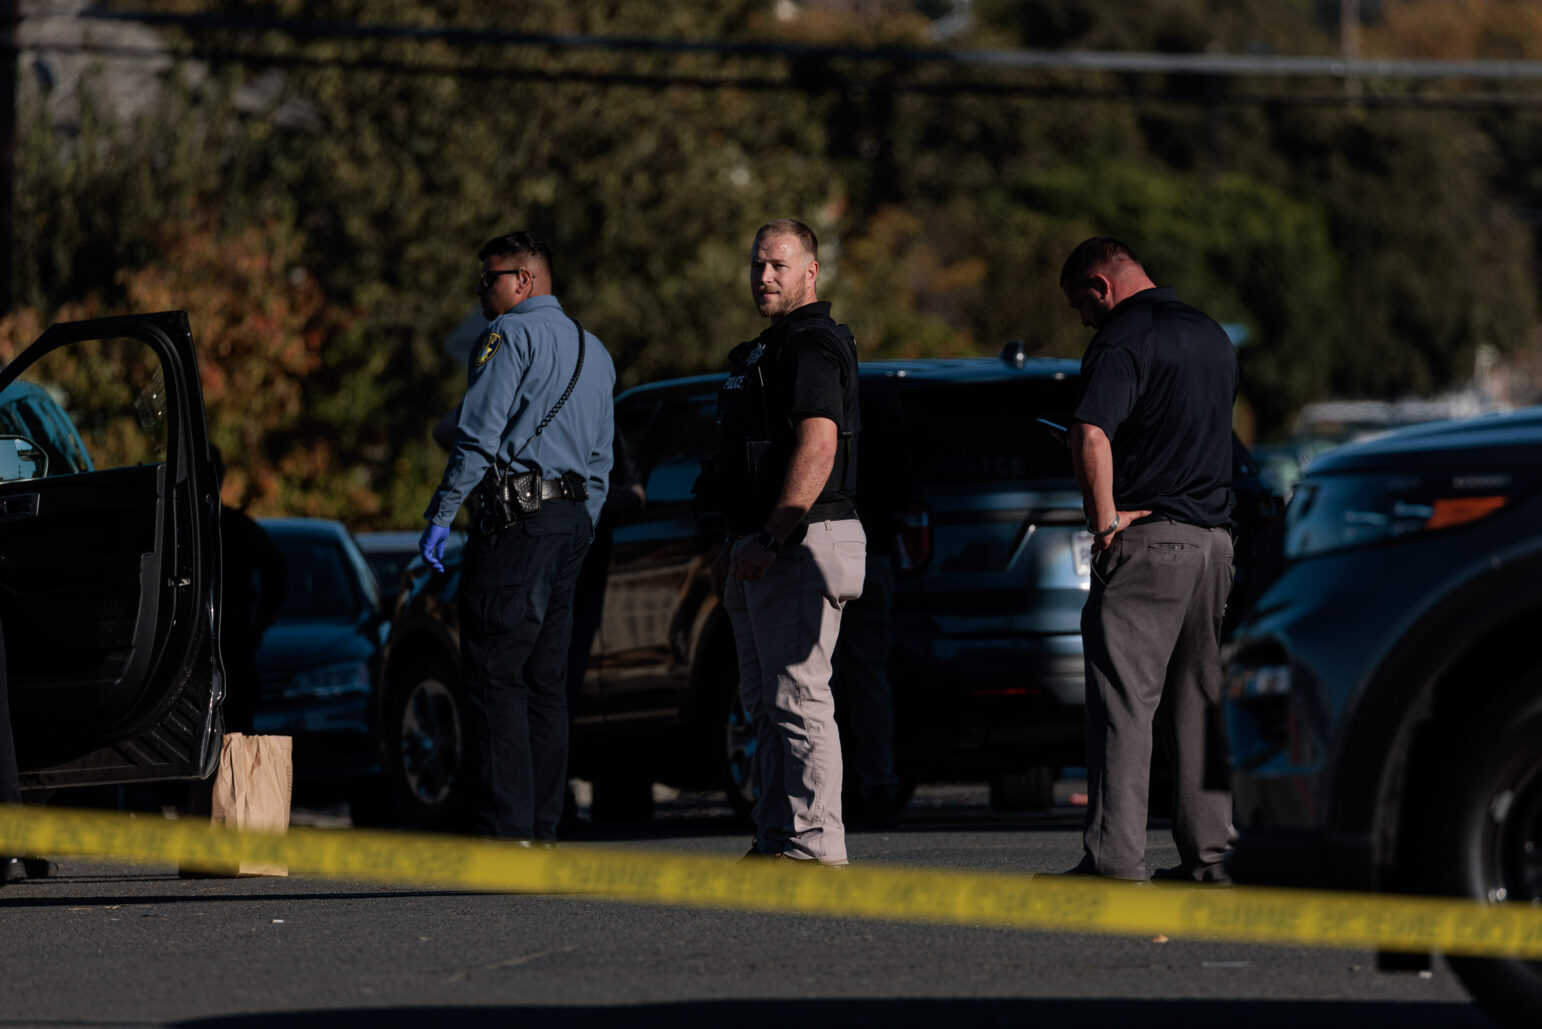 Flanked by another investigator and a police assistant, a blonde police detective in khaki pants and a black shirt looks out from a crime scene during the daytime.